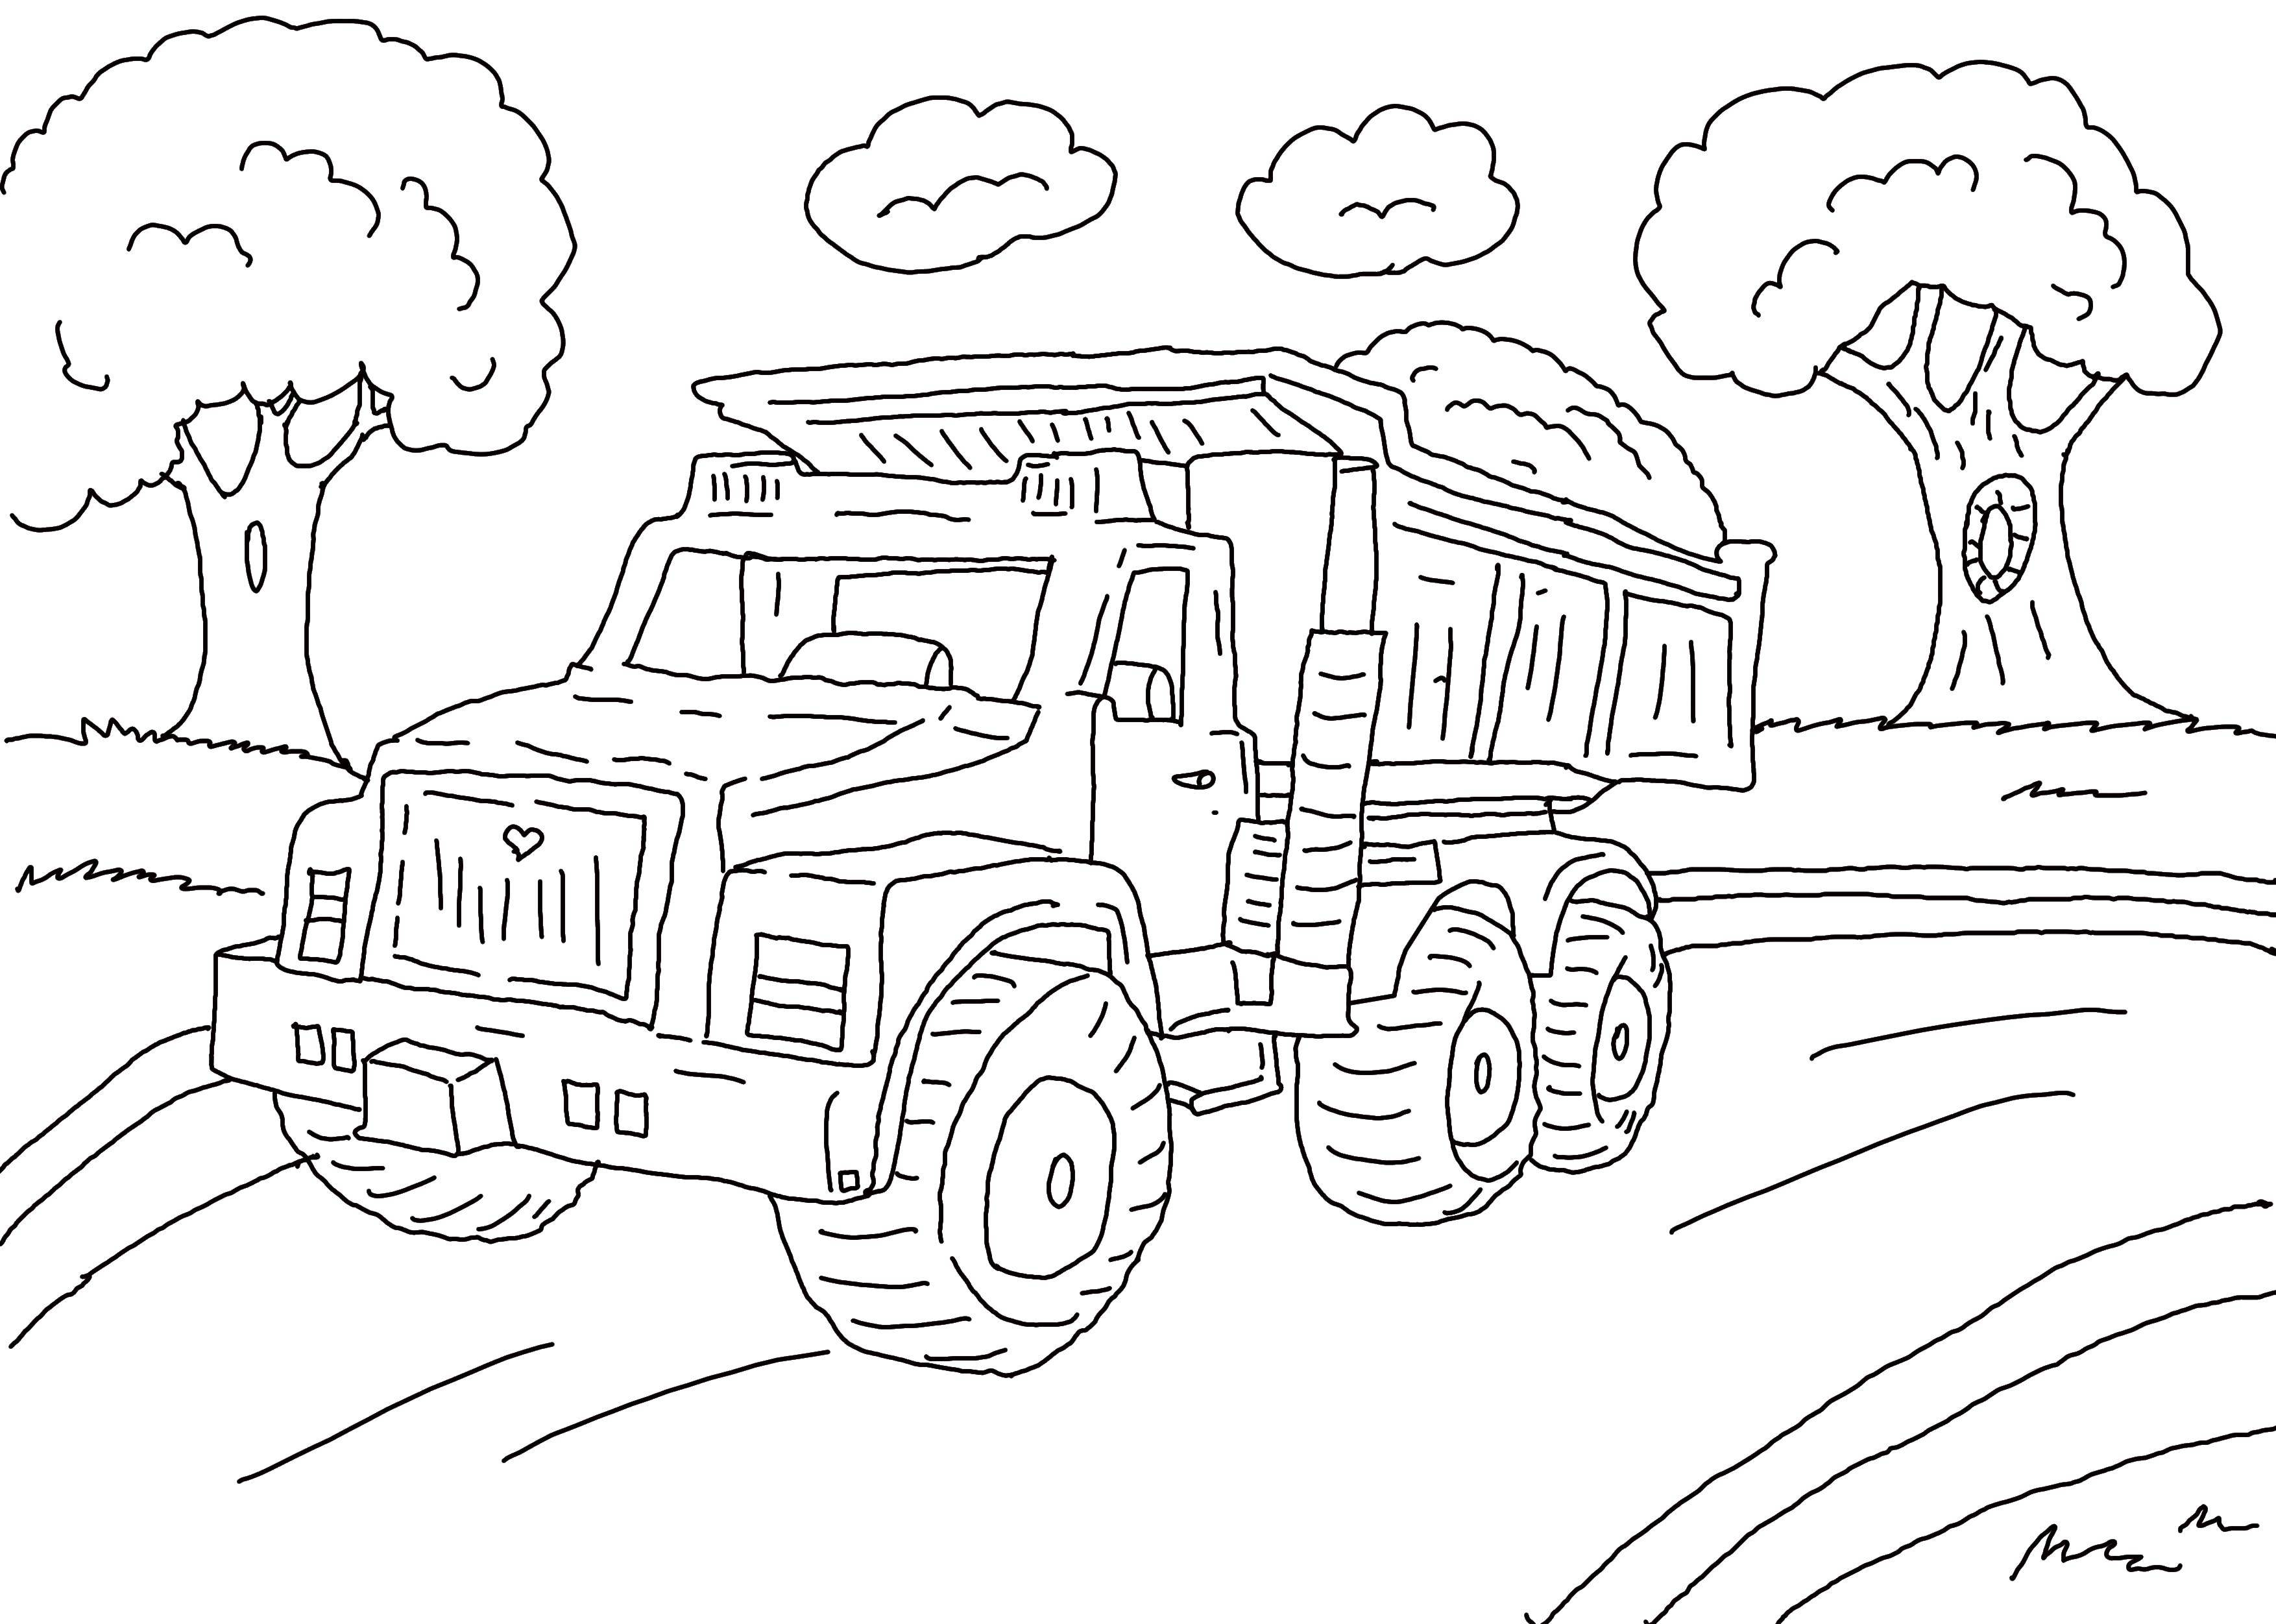 Coloring The jeep on the road. Category machine . Tags:  machine, trees, wheels.